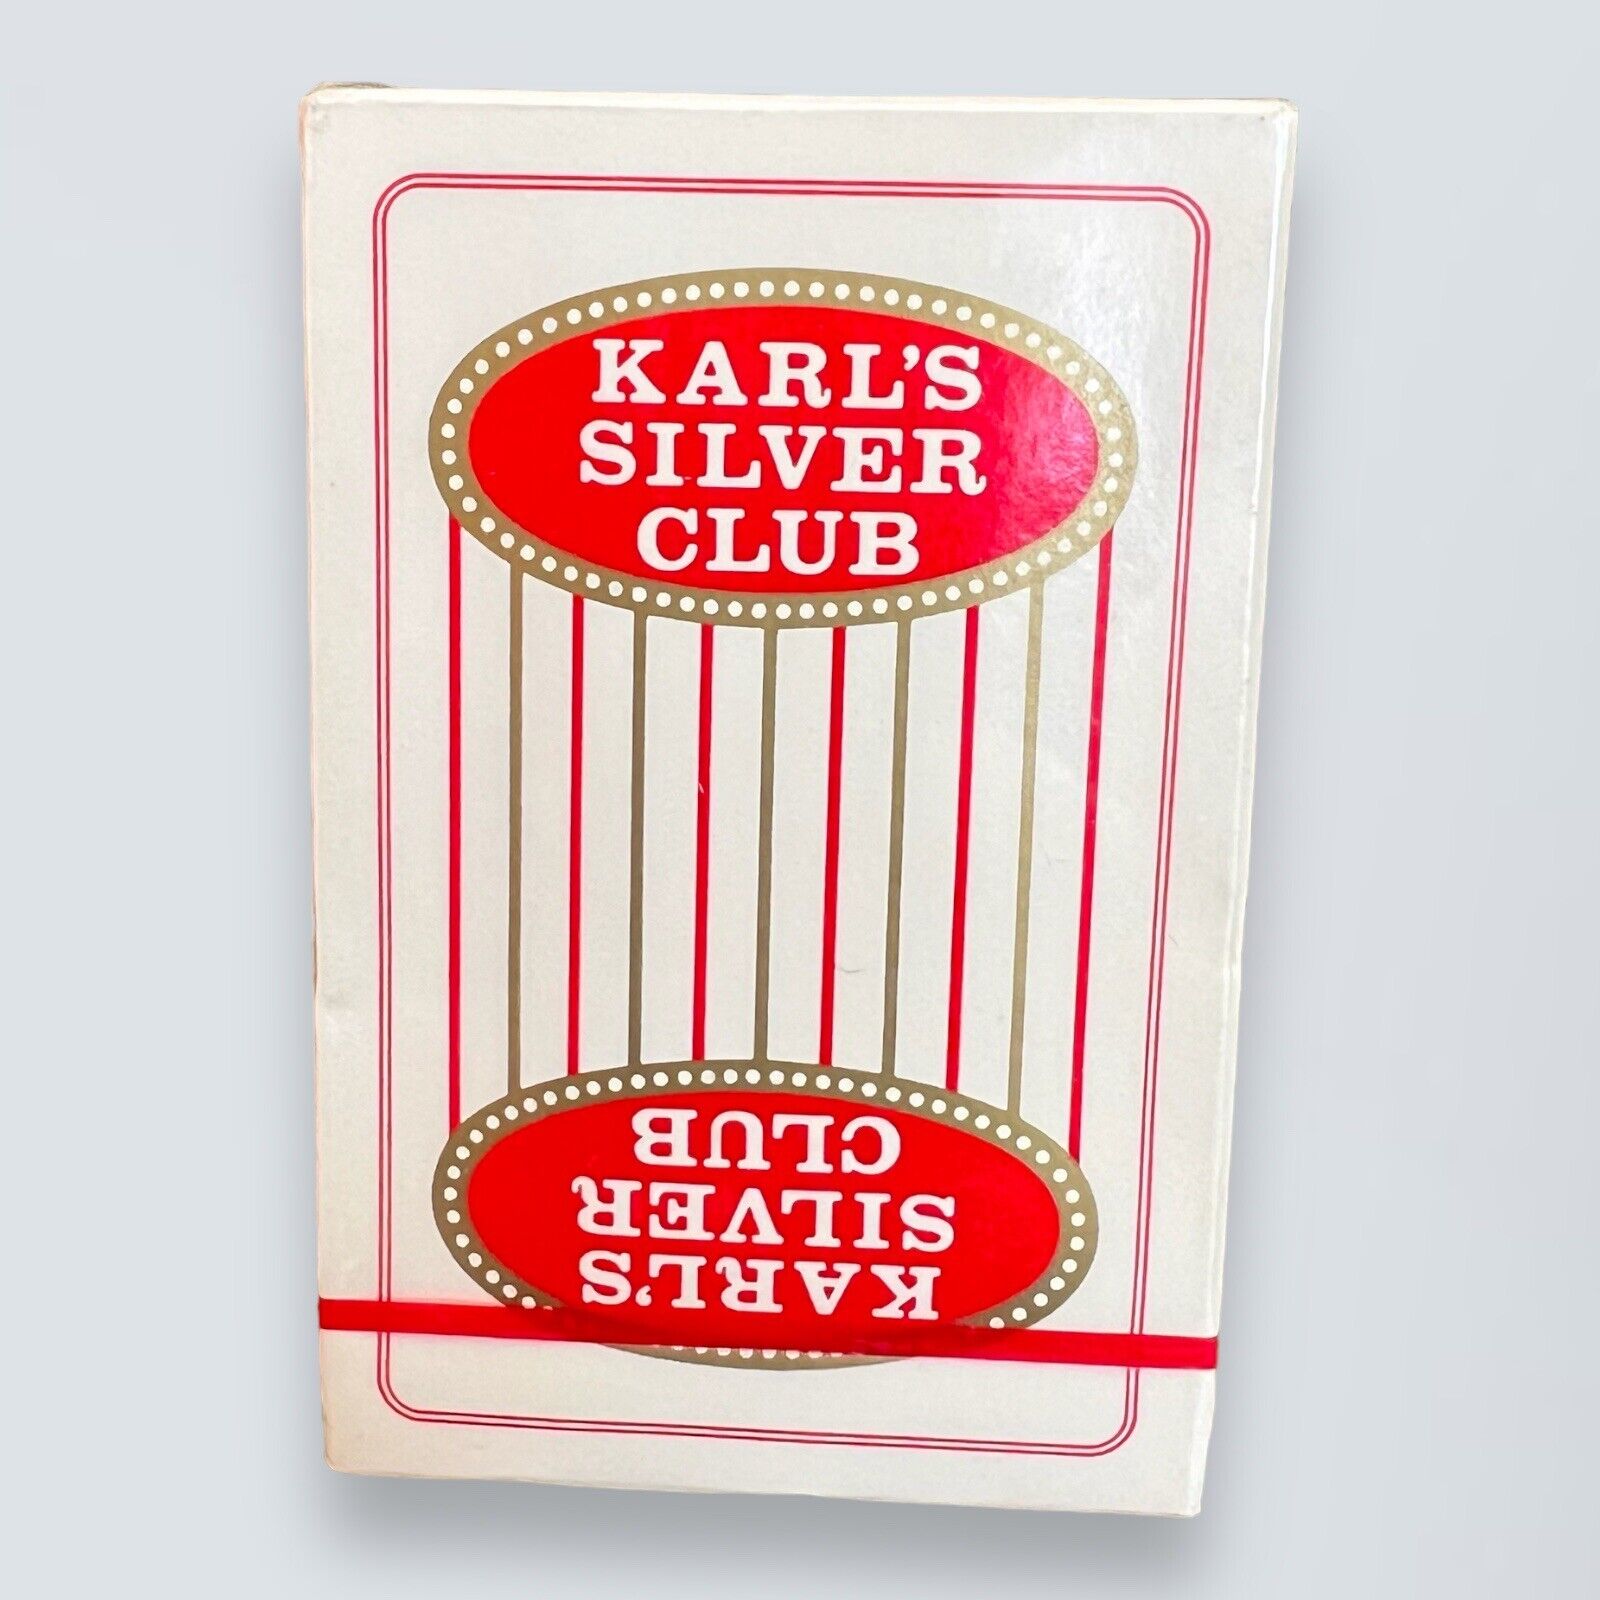 Vintage Karl's Silver Club Casino Sparks Sealed Playing Card Decks Lot 1980s